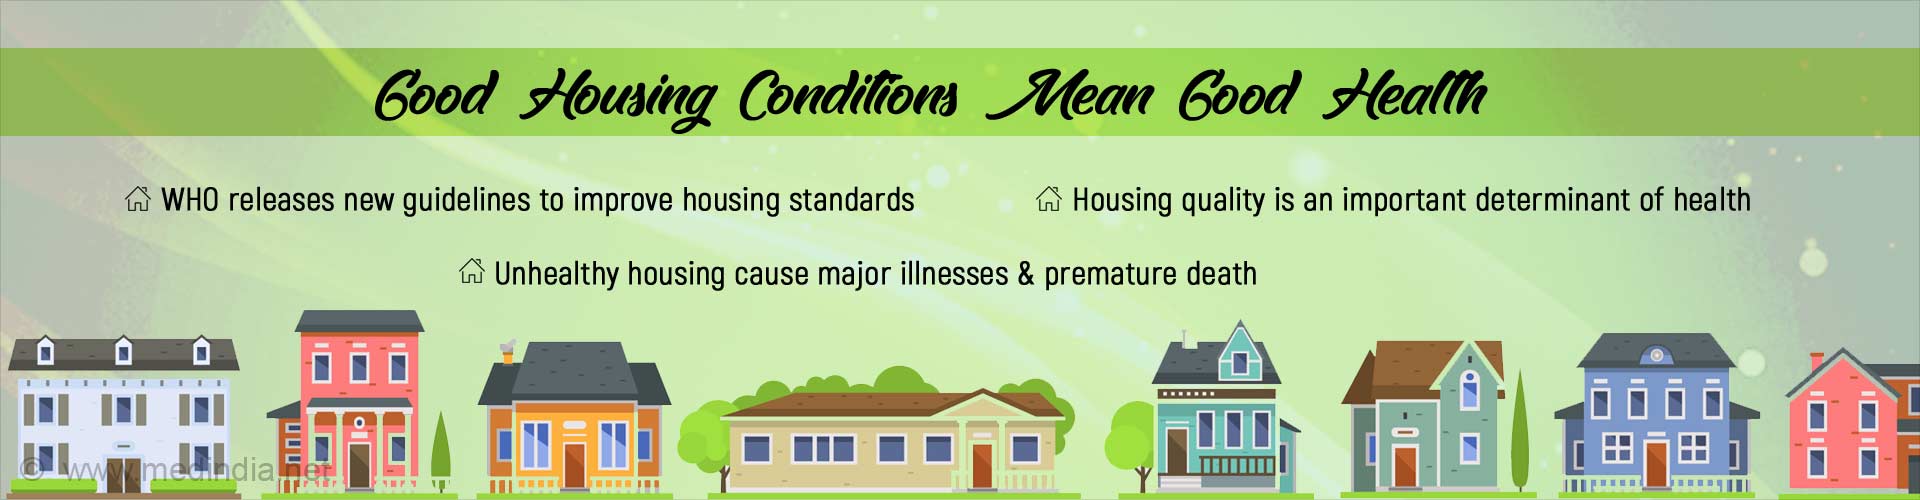 Good housing conditions mean good health. WHO releases new guidelines to improve housing standards. Housing quality is an important determinant of health. Unhealthy housing causes major illnesses & premature death.